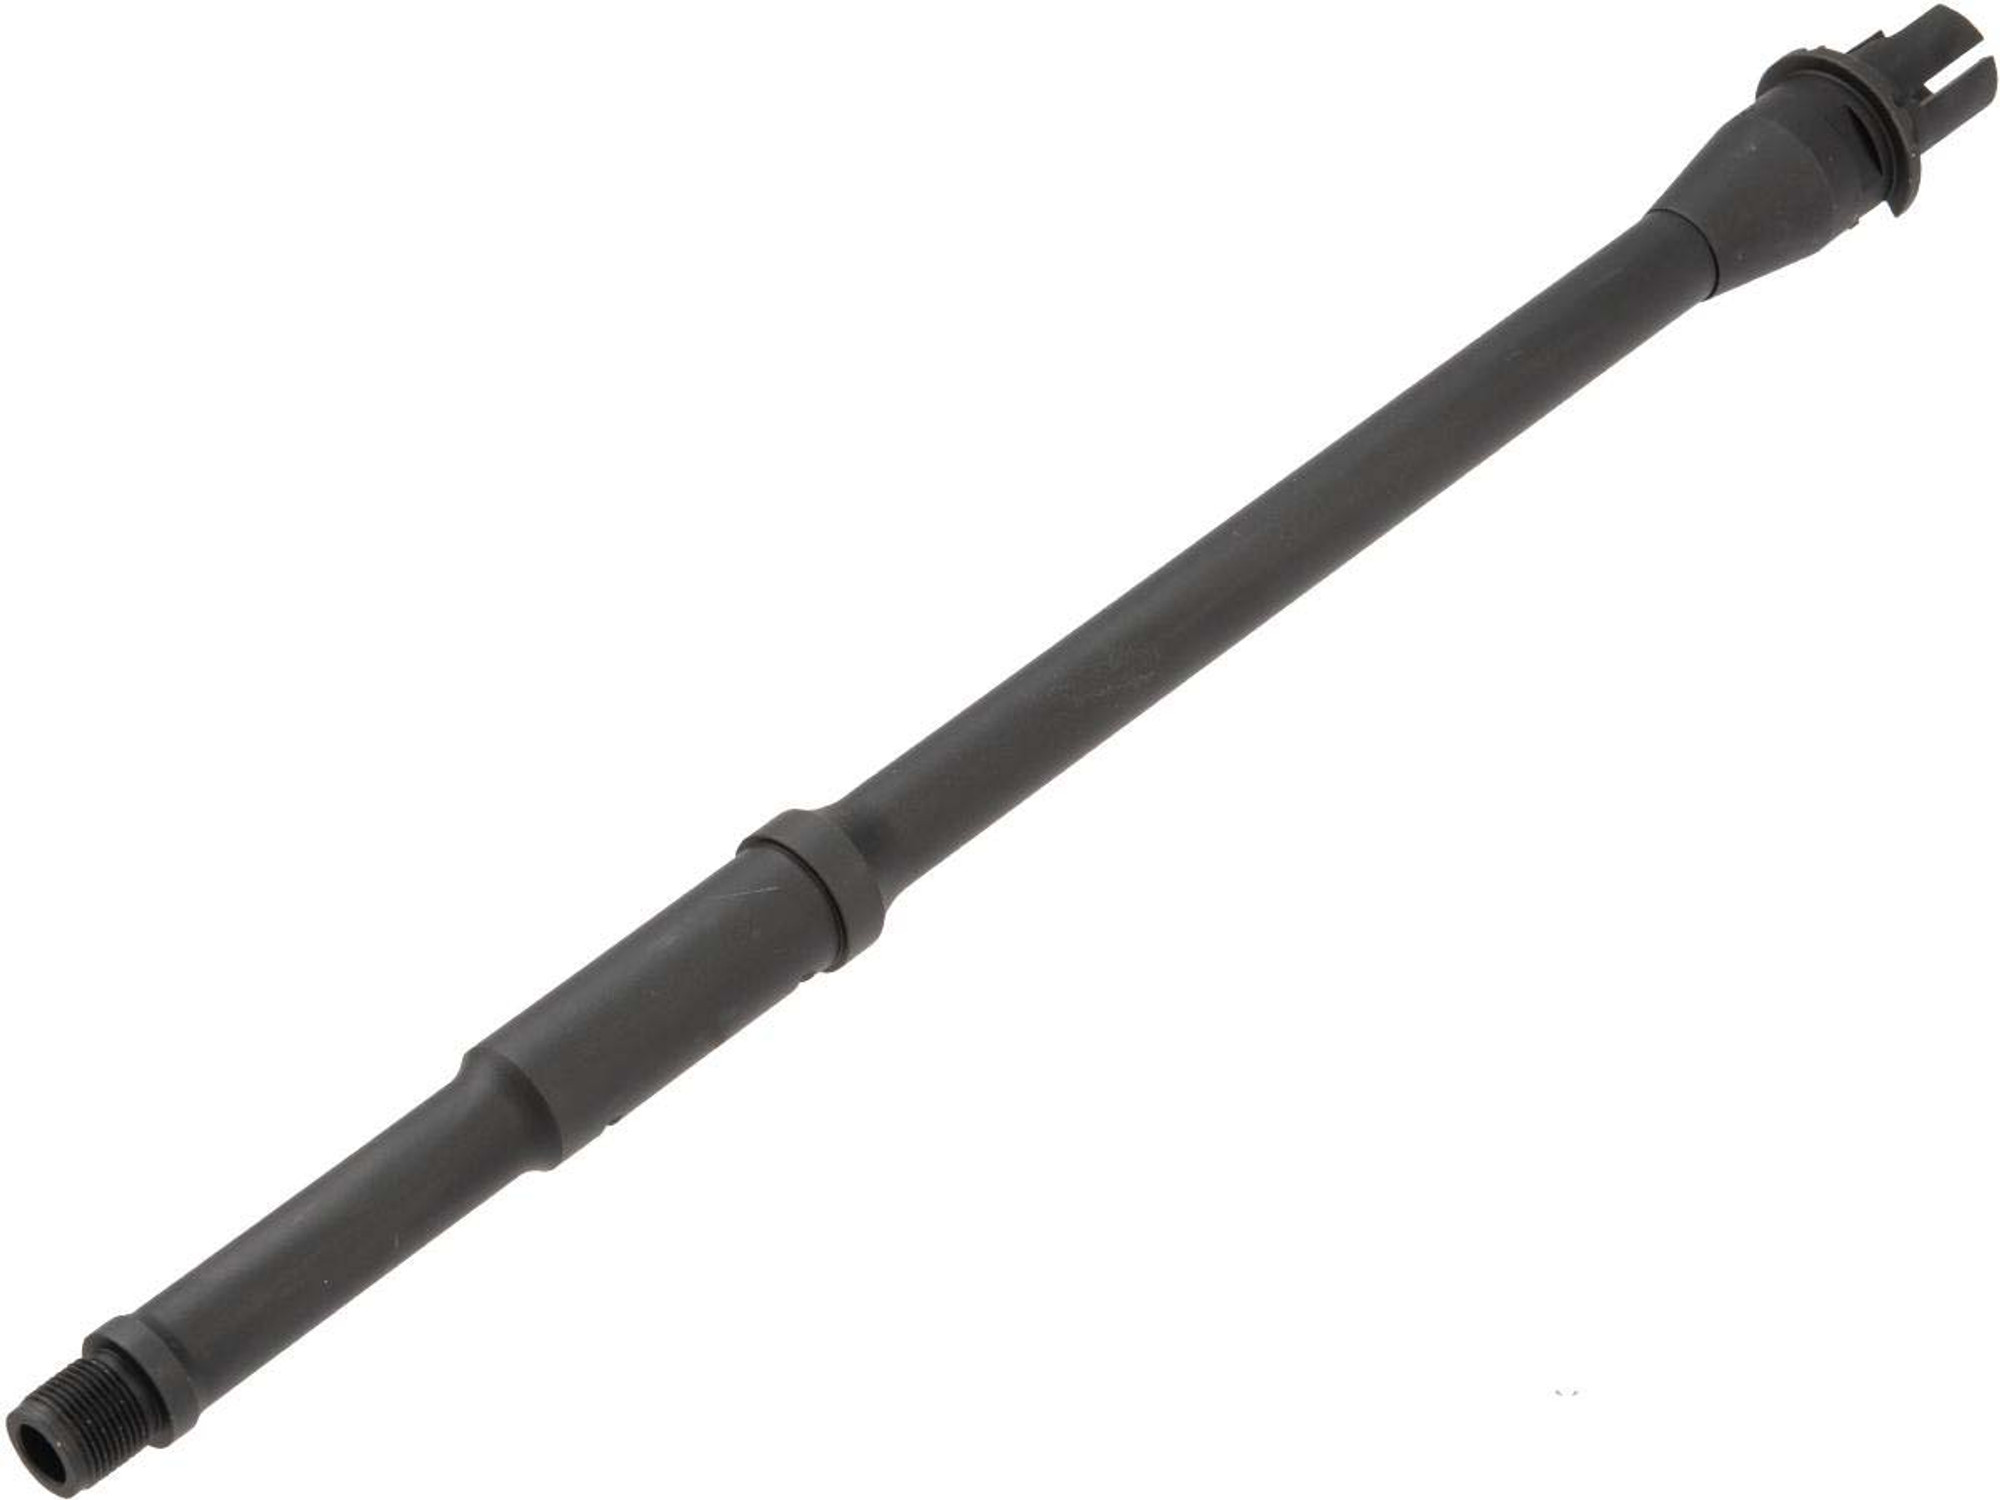 5KU Full Metal Outer Barrel for M4/M16 Series Airsoft AEGs (Length: 14.5" / Lightweight / M4 Profile)